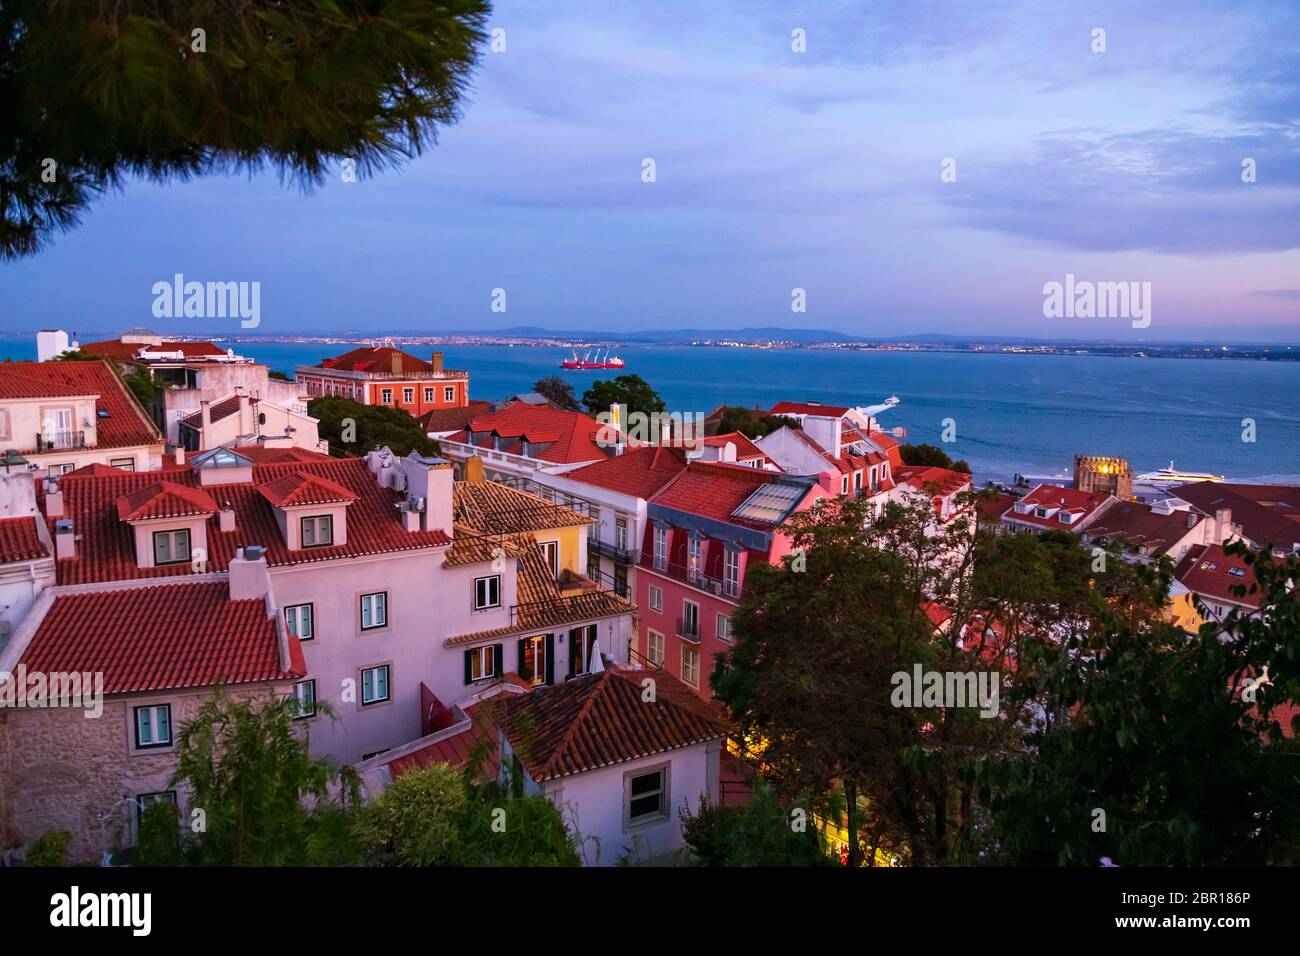 View of Tagus River in Lisbon city at the evening, seen from Sao Jorge Castle hill, Portugal Stock Photo